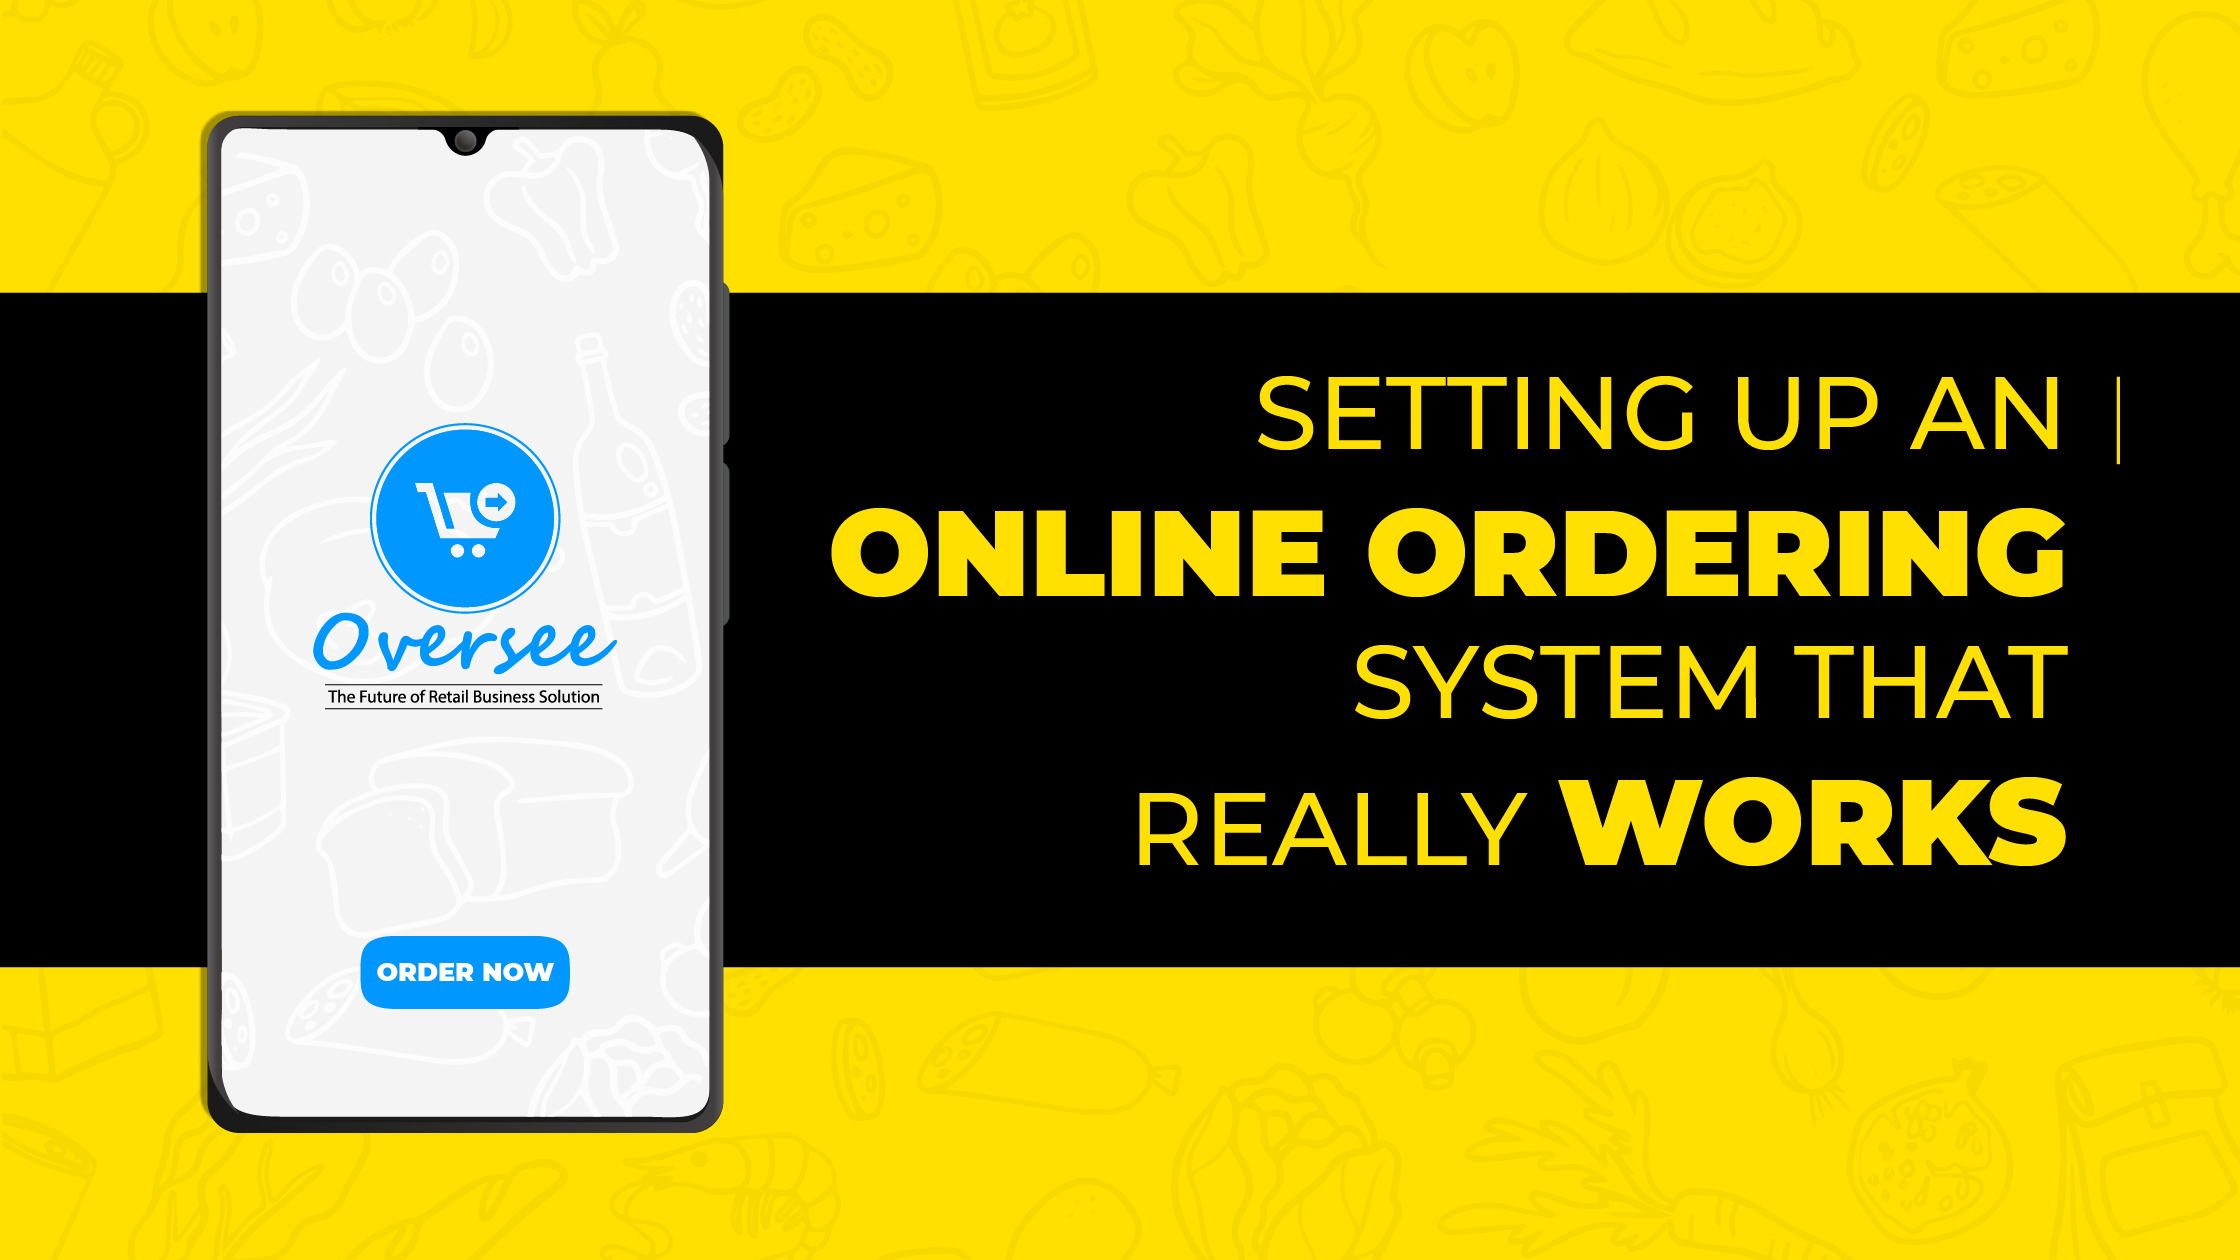 Setting up an online ordering system that really works